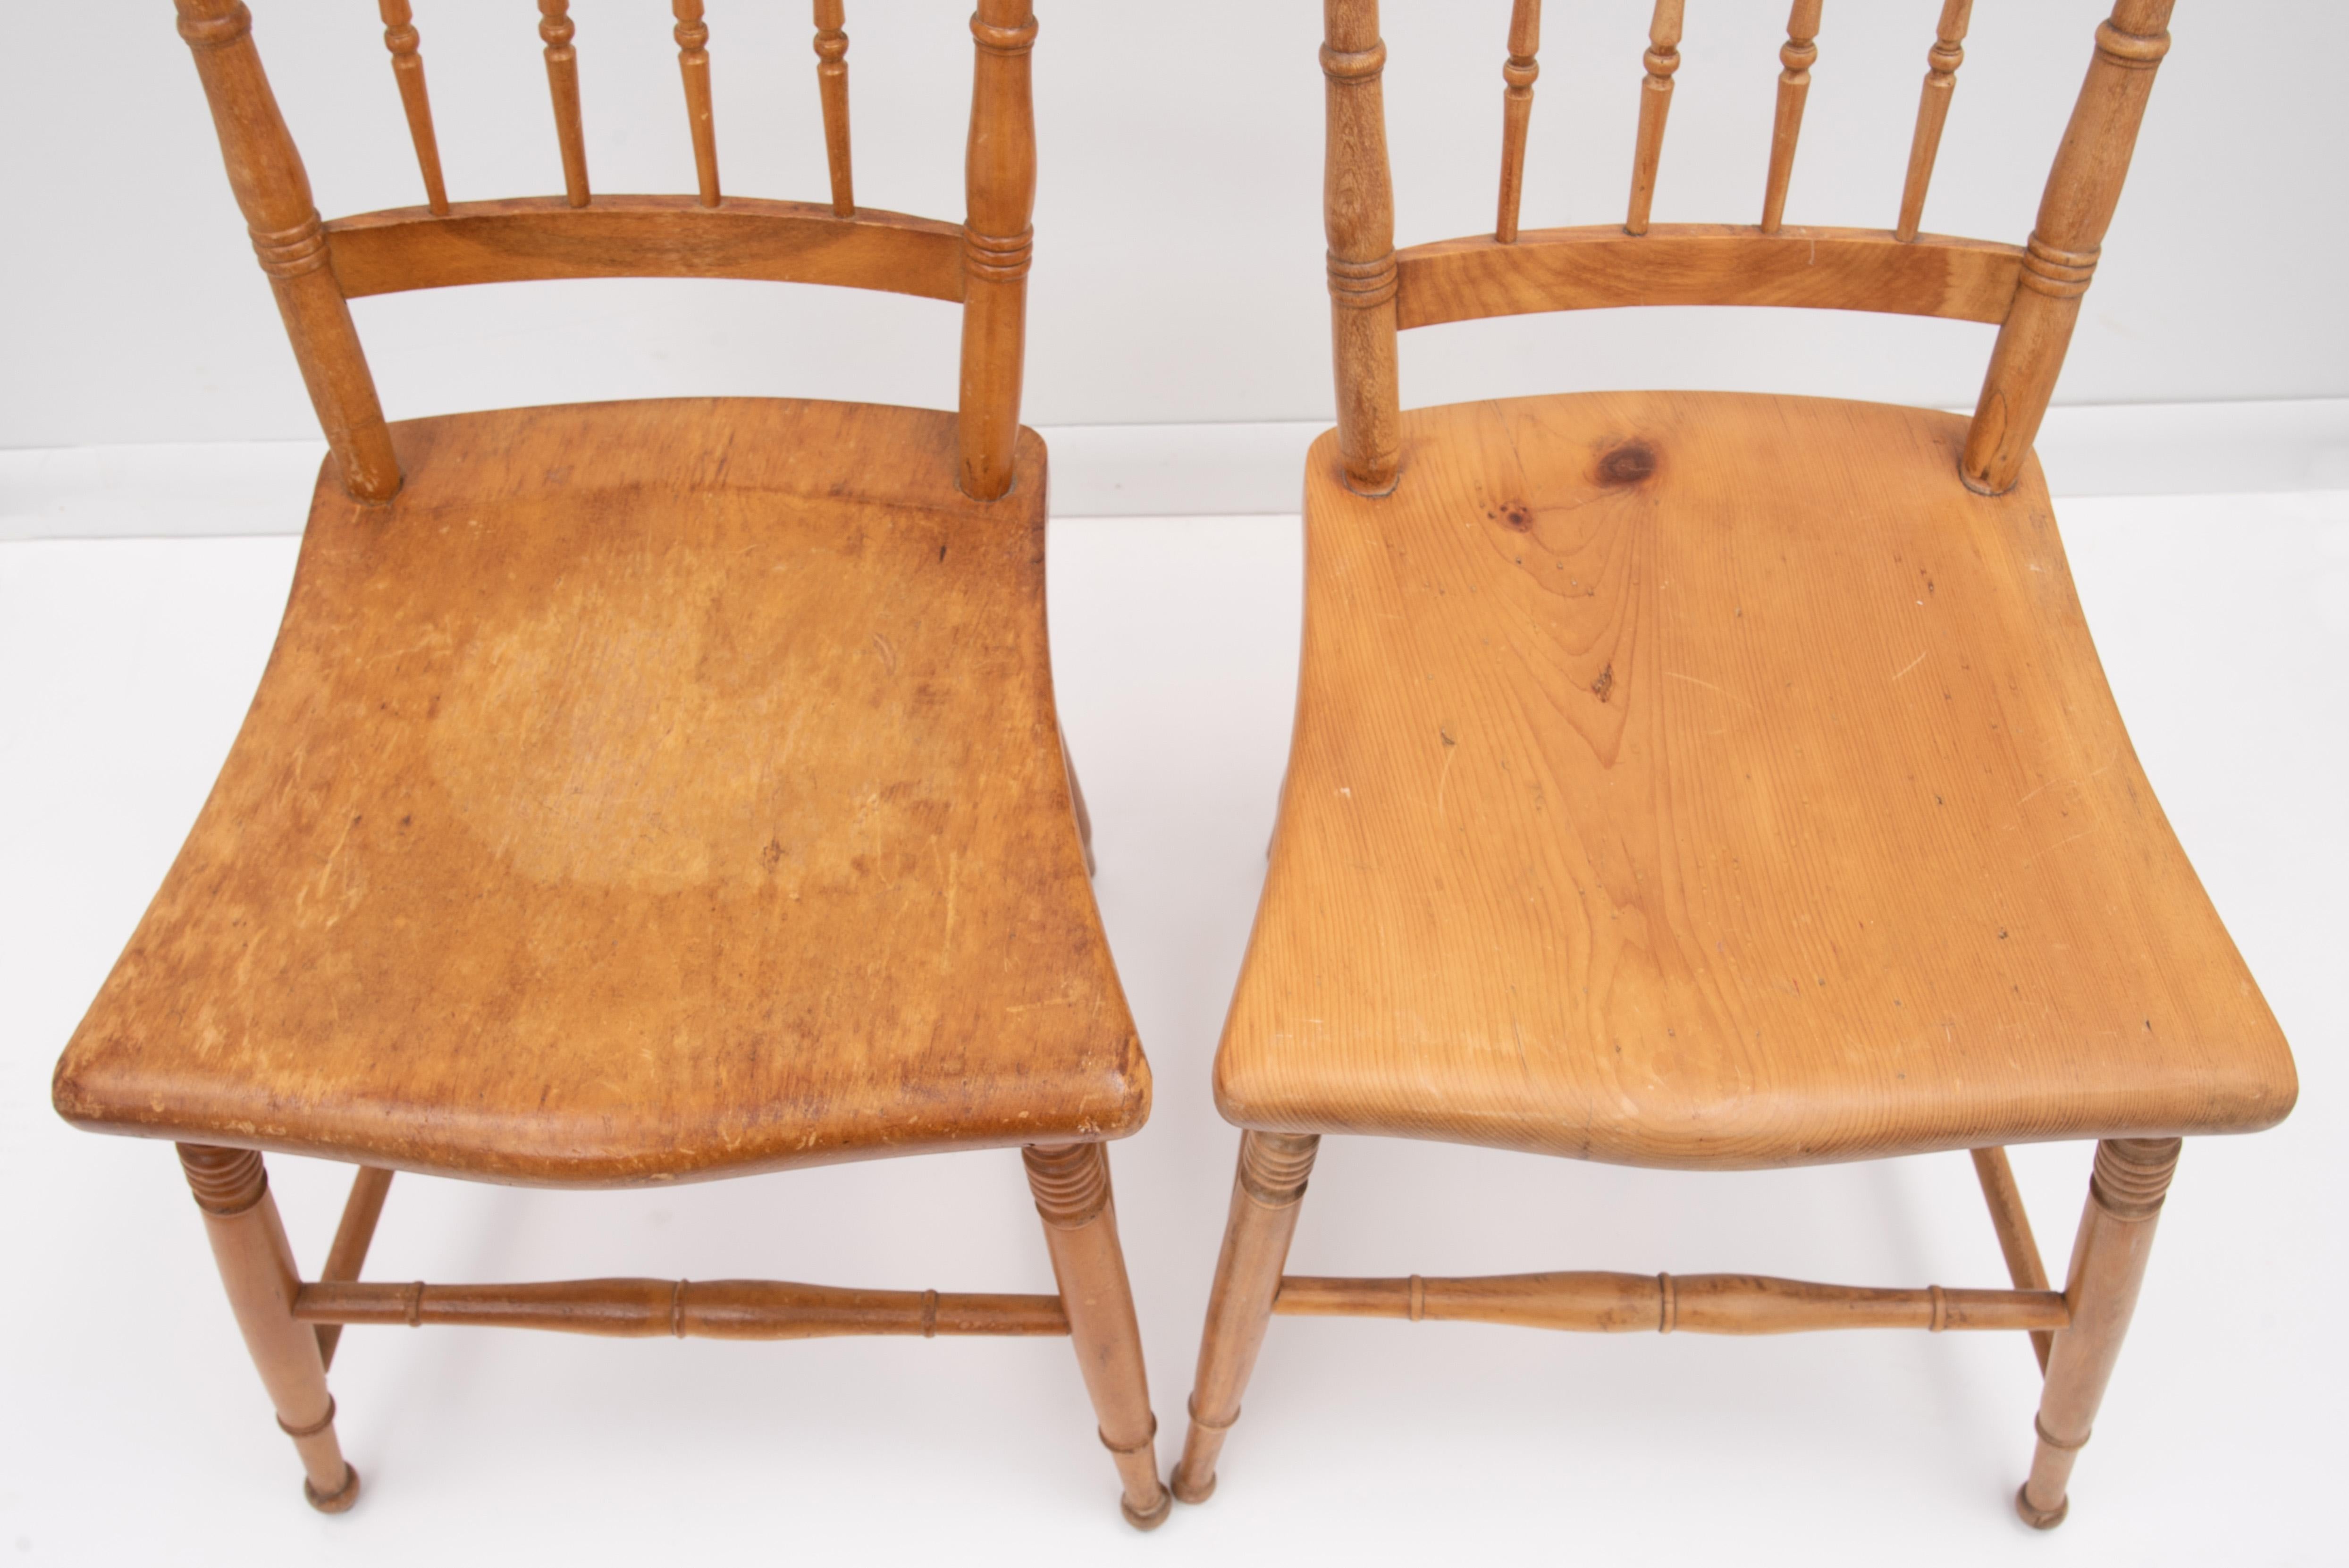 English Scrubbed Pine Plank Seat Dining Chairs Farmhouse Cottage, a Set of Four For Sale 5